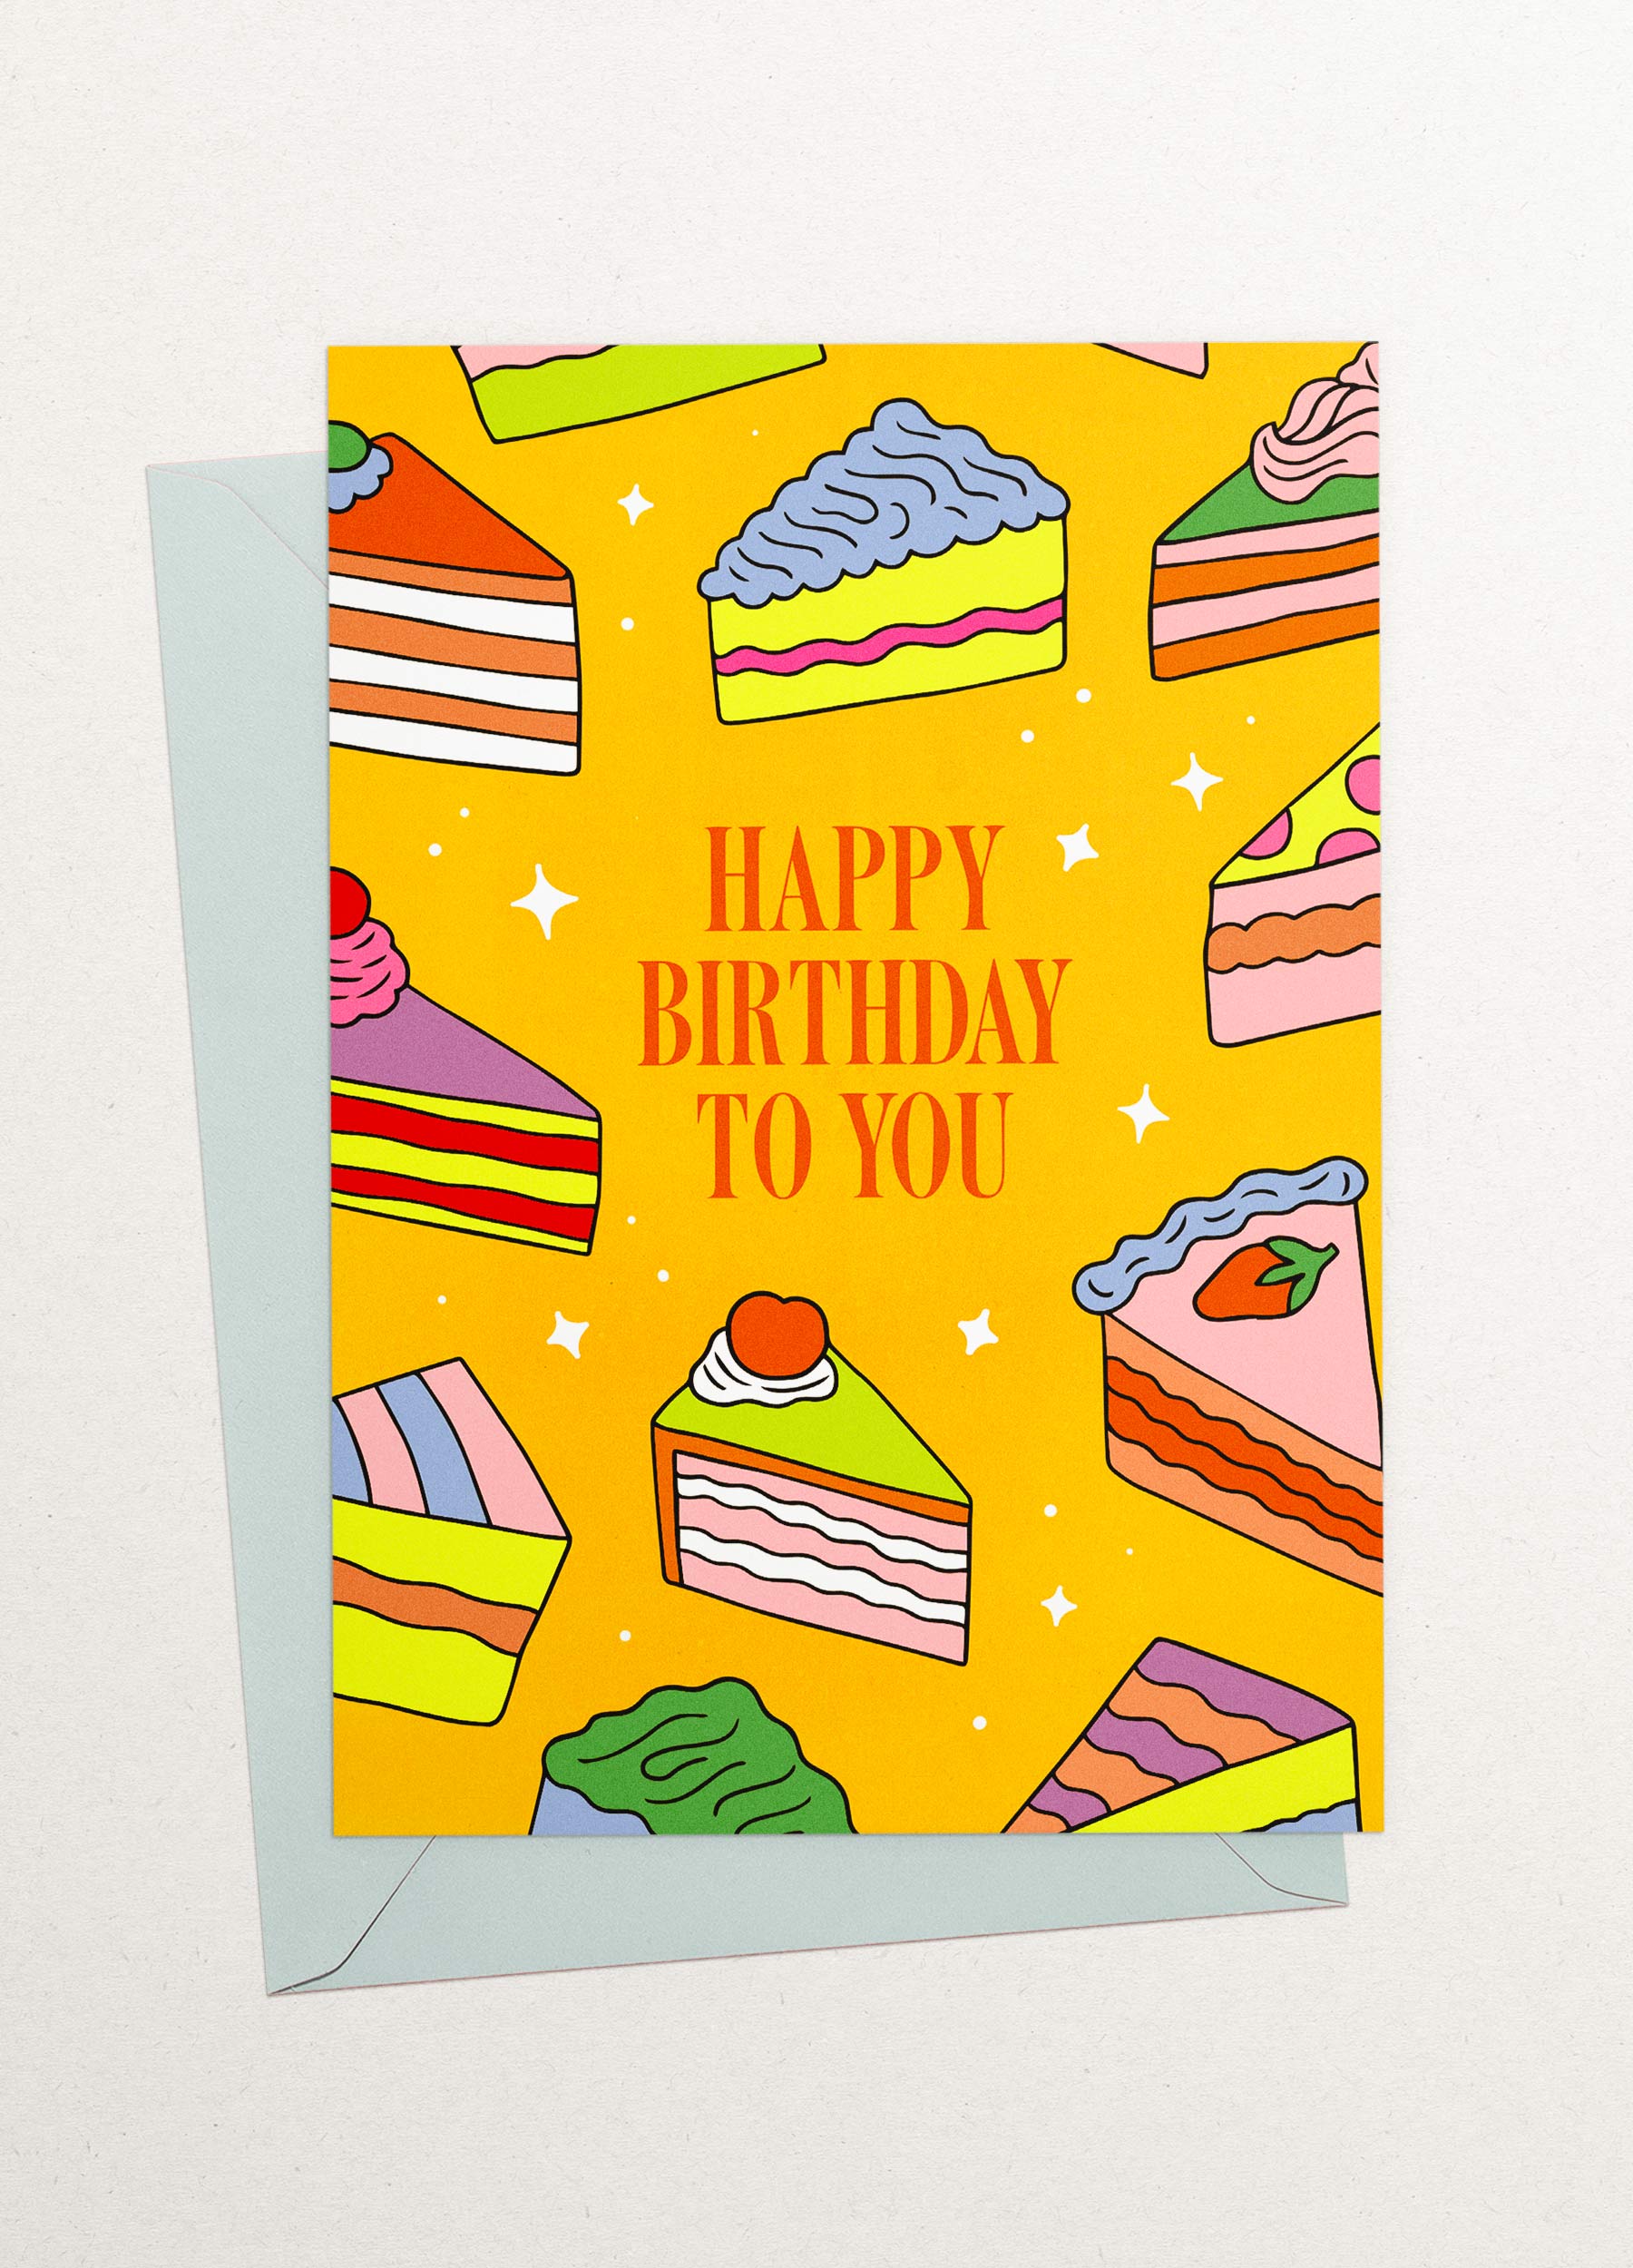 This is an image of a greeting card by Kiosk, that is illustrated by Georgia Perry. The card has a yellow background and illustrations of different types of cake slices scattered across the background. The cakes are in different colors and styles, including pink, green, and orange. The text on the card reads “Happy Birthday to You” in white letters. There are also small white stars scattered across the background. Partially showing behind it is a light blue envelope.